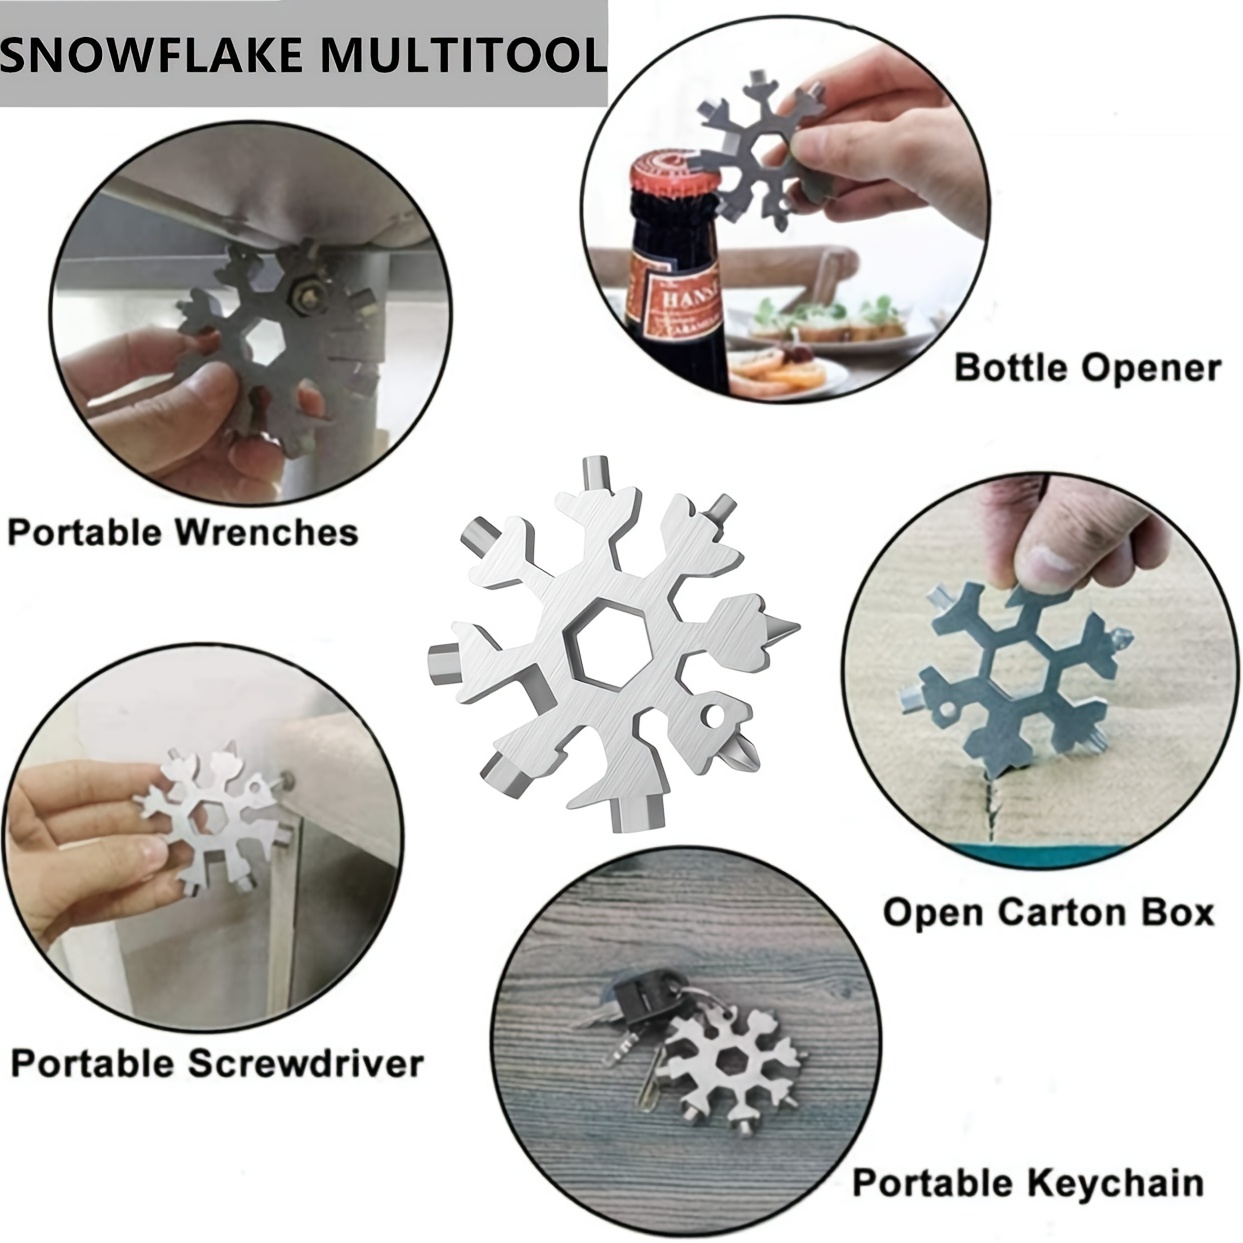  Gifts for Men, 18 in 1 Snowflake Multitool, Stocking